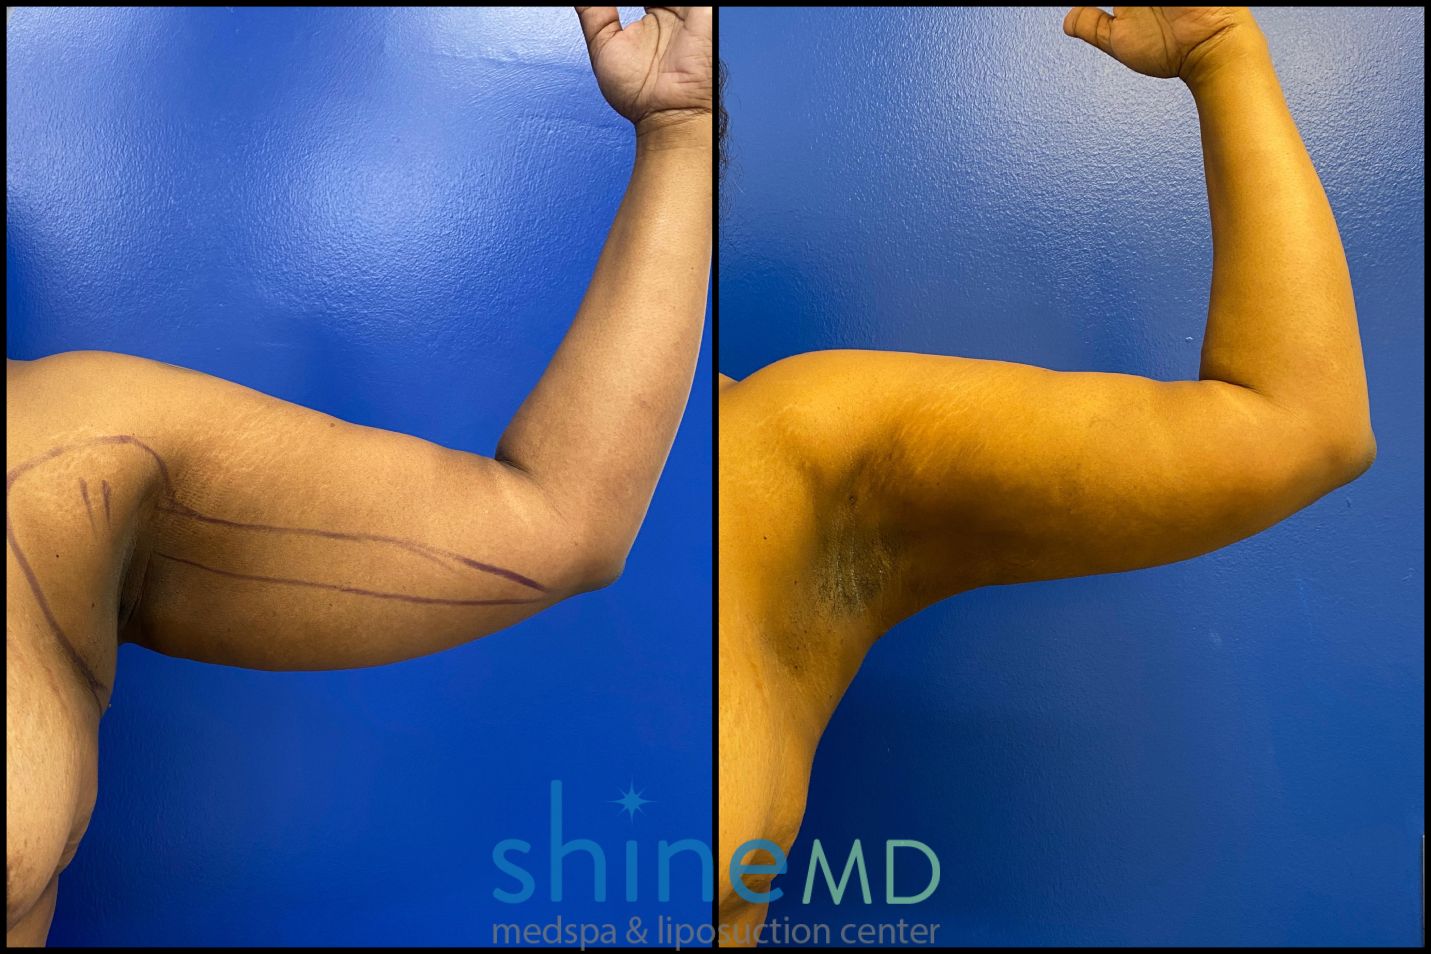 arm liposuction treatment before and after photos